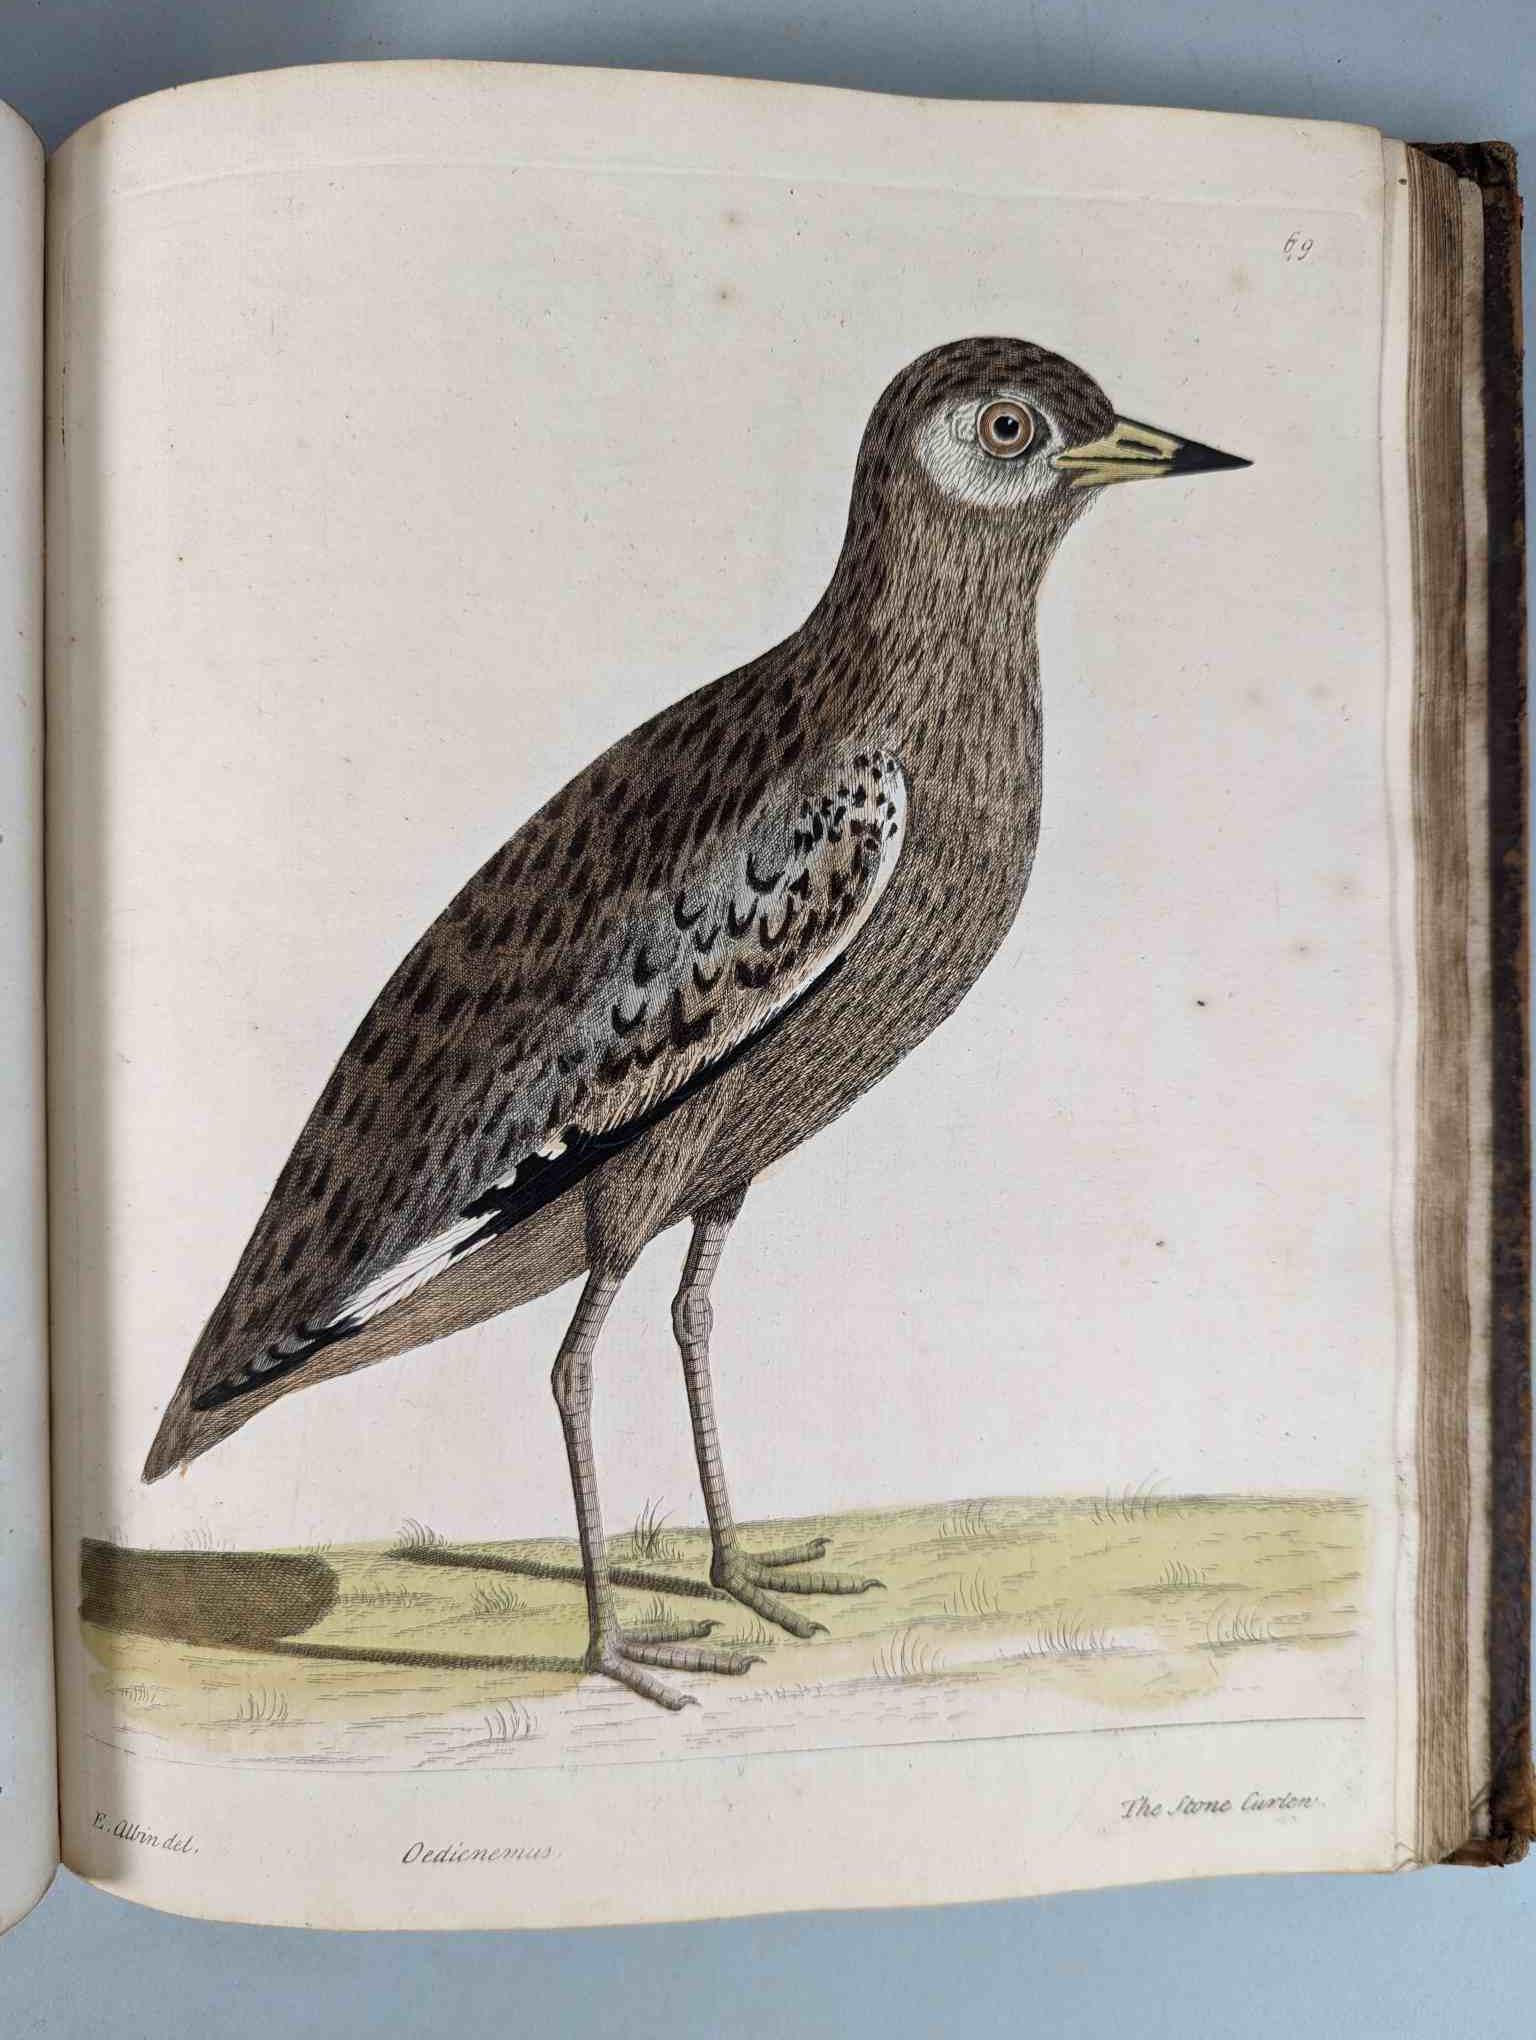 ALBIN, Eleazar. A Natural History of Birds, to which are added, Notes and Observations by W. - Image 72 of 208